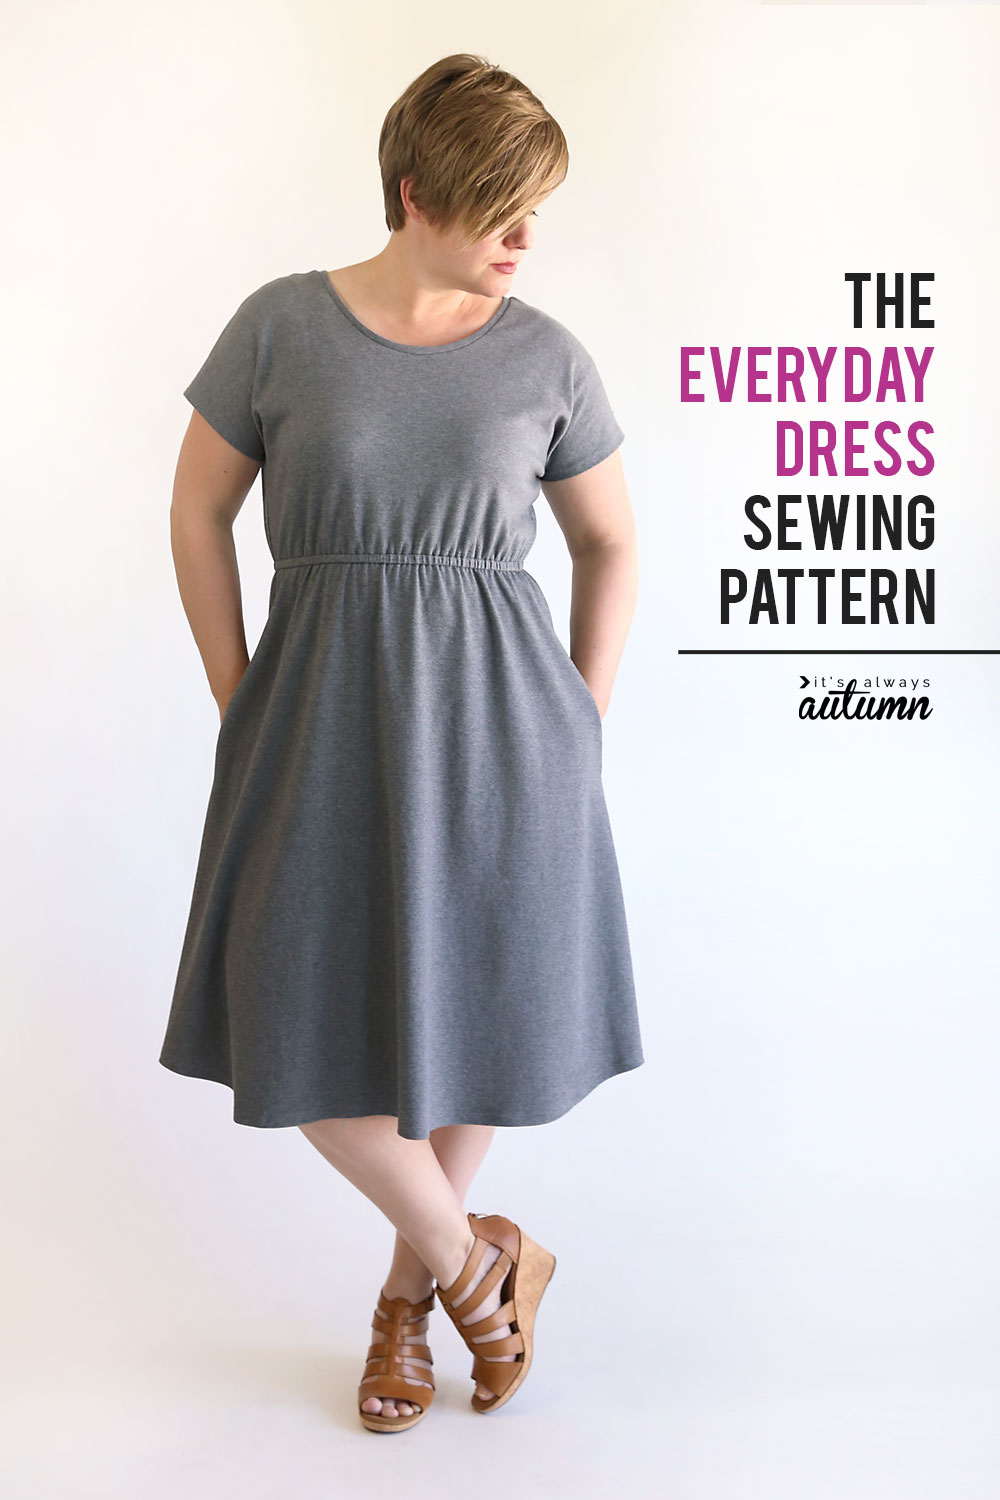 the-everyday-dress-sewing-pattern-tutorial-it-s-always-autumn